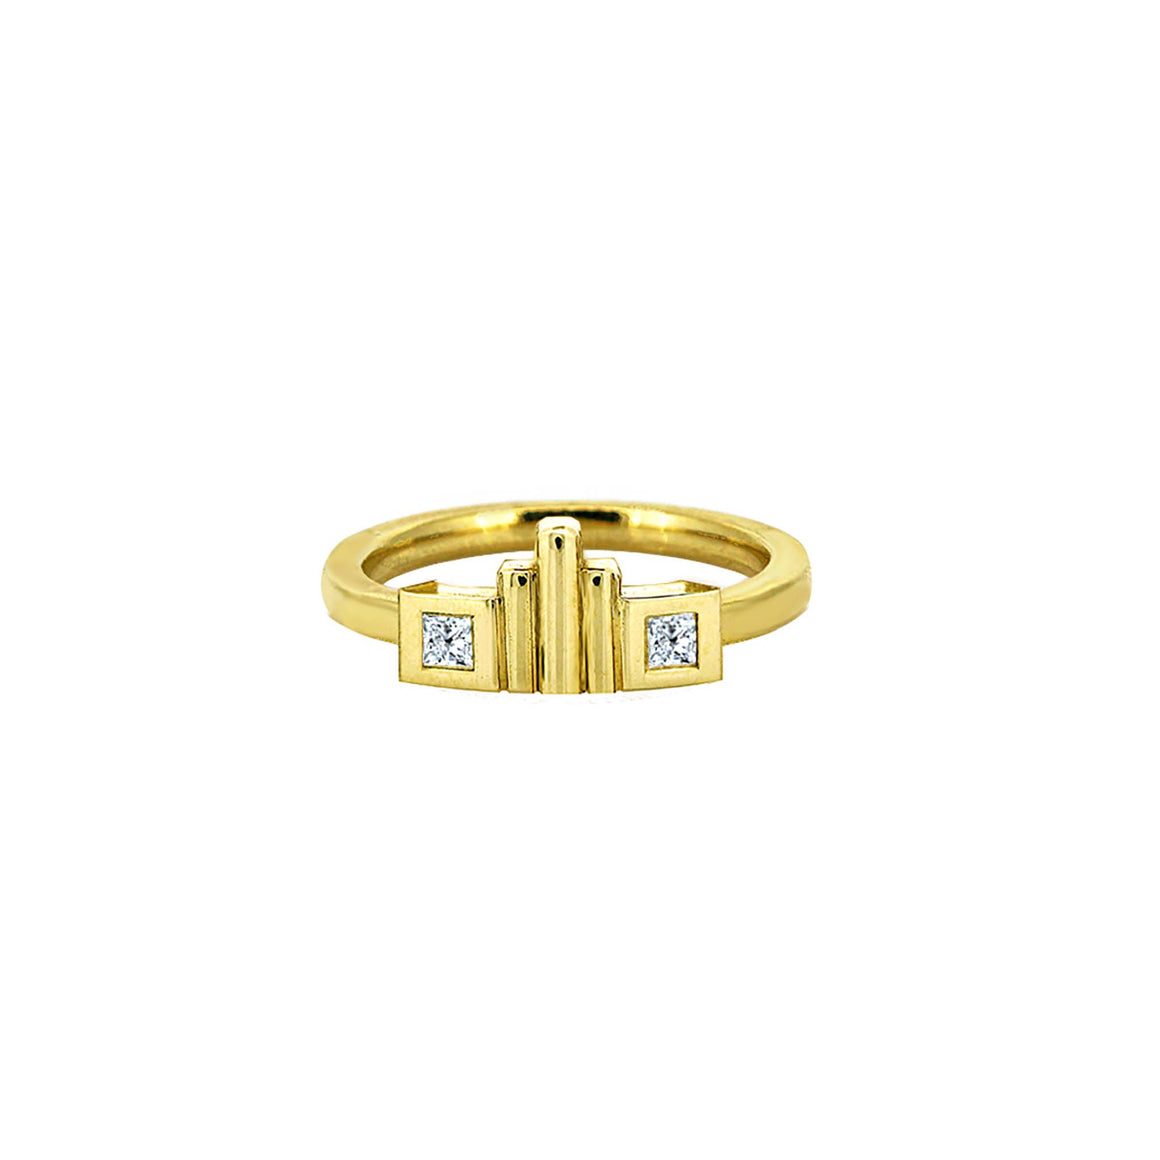 Petite Odeon stack ring with diamond detail in yellow gold